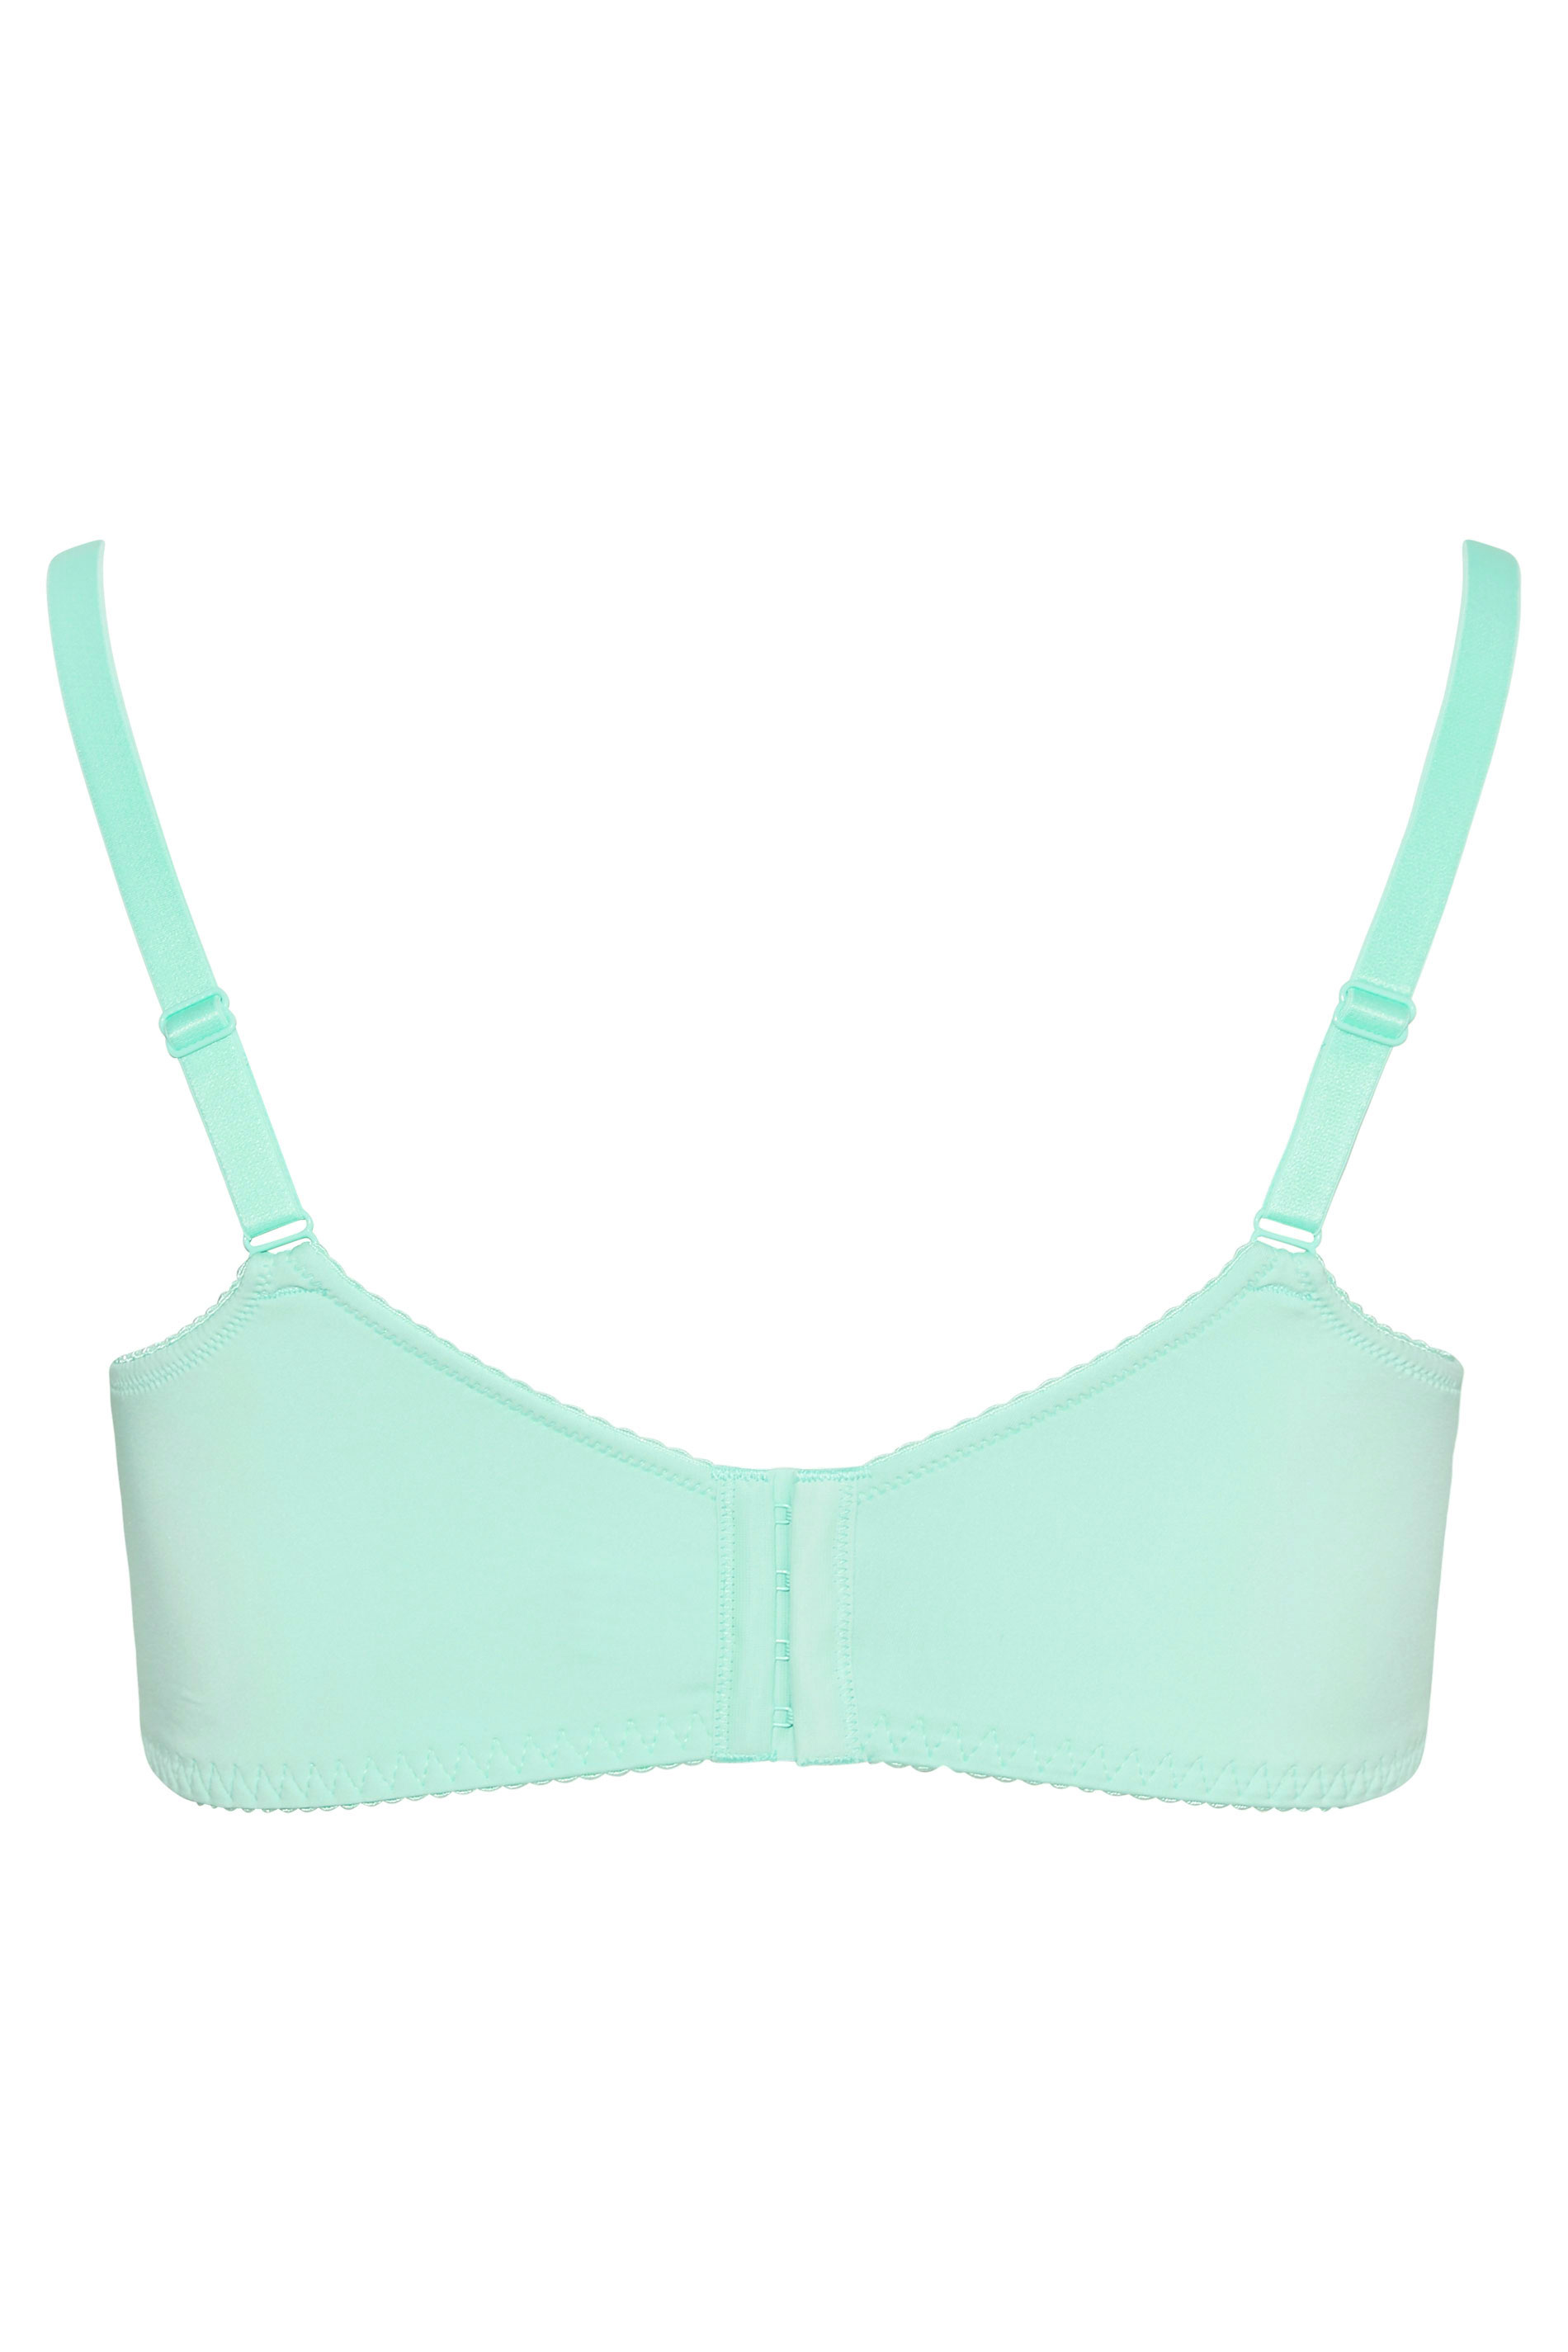 Womens Underwear Tight Fitting Vest Top Lace Bra Tight Fitting Underwear  Top Tops with Shelf Bra for Women plus, Mint Green, Small : :  Clothing, Shoes & Accessories